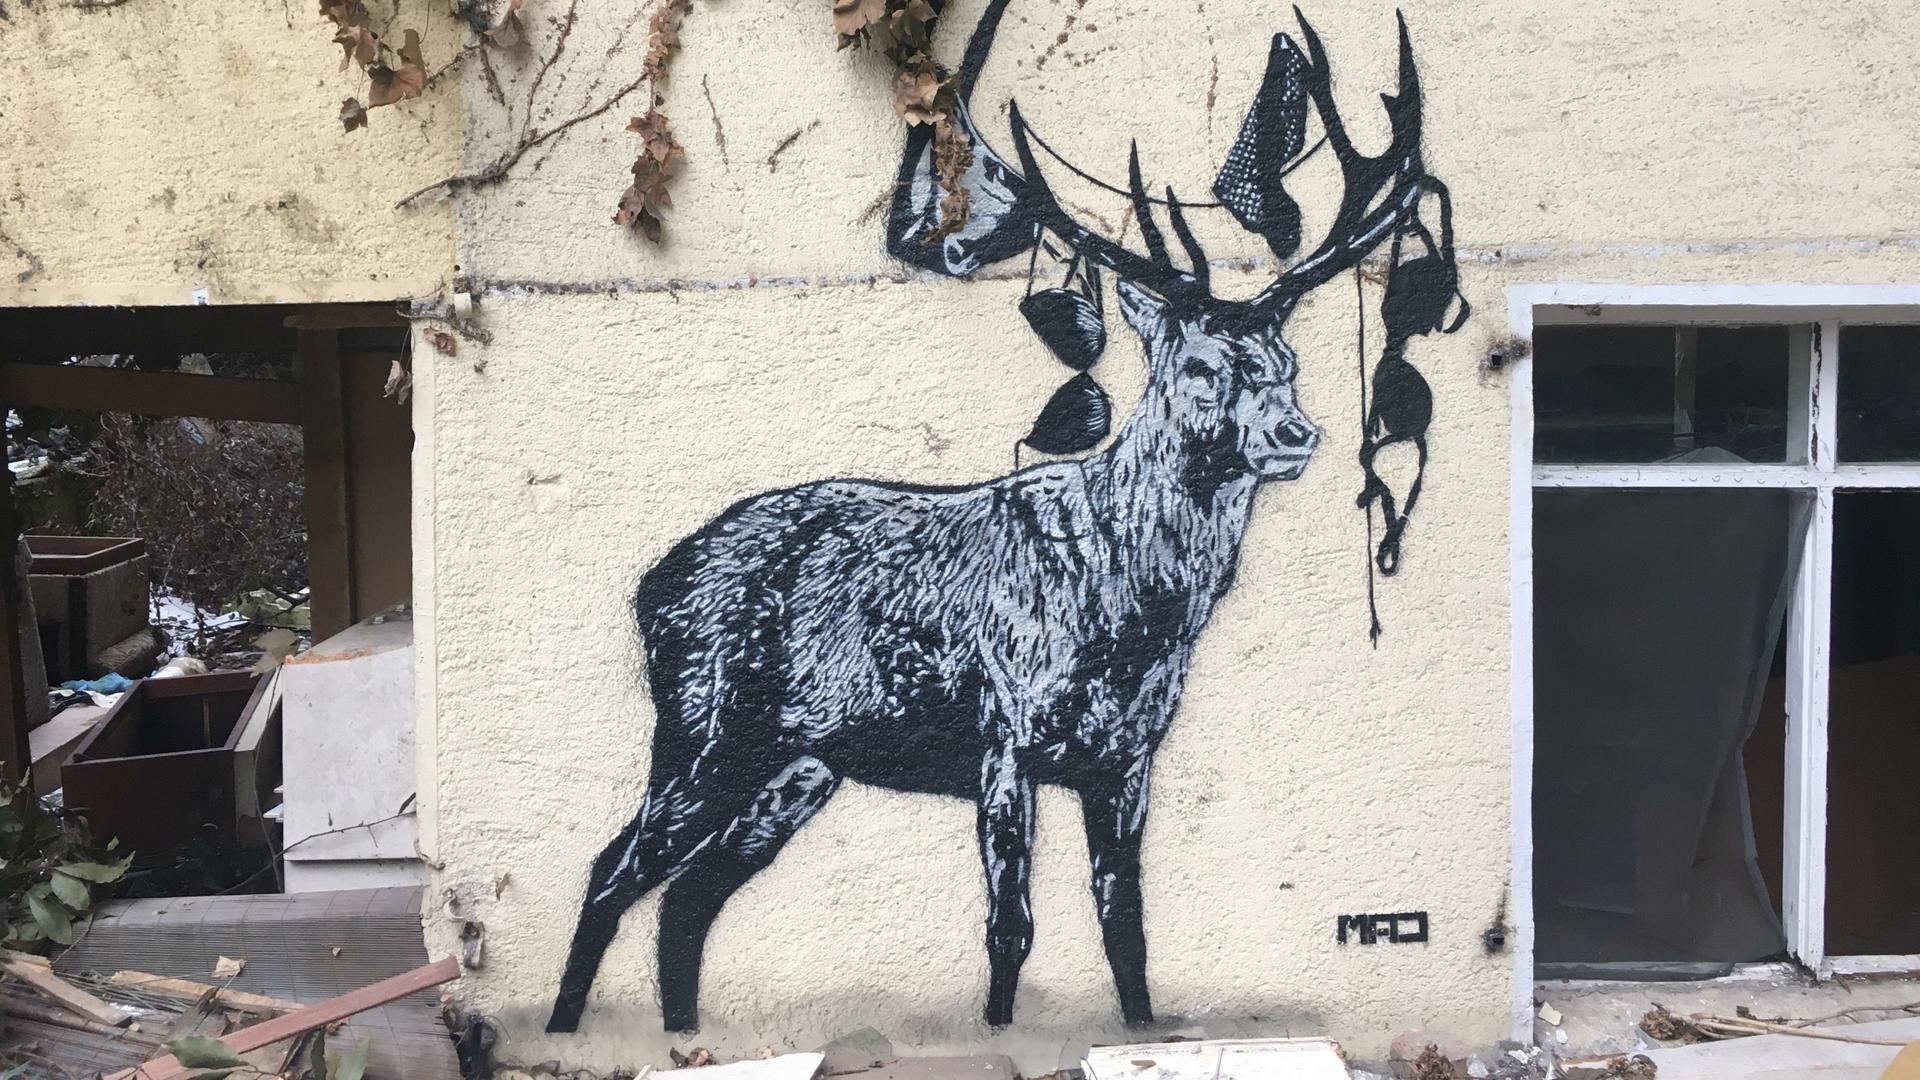 On the exterior of the building, the stencil of a stag created by the artist MAD stands solemnly, with pieces of women's underwear hanging from its horns. 